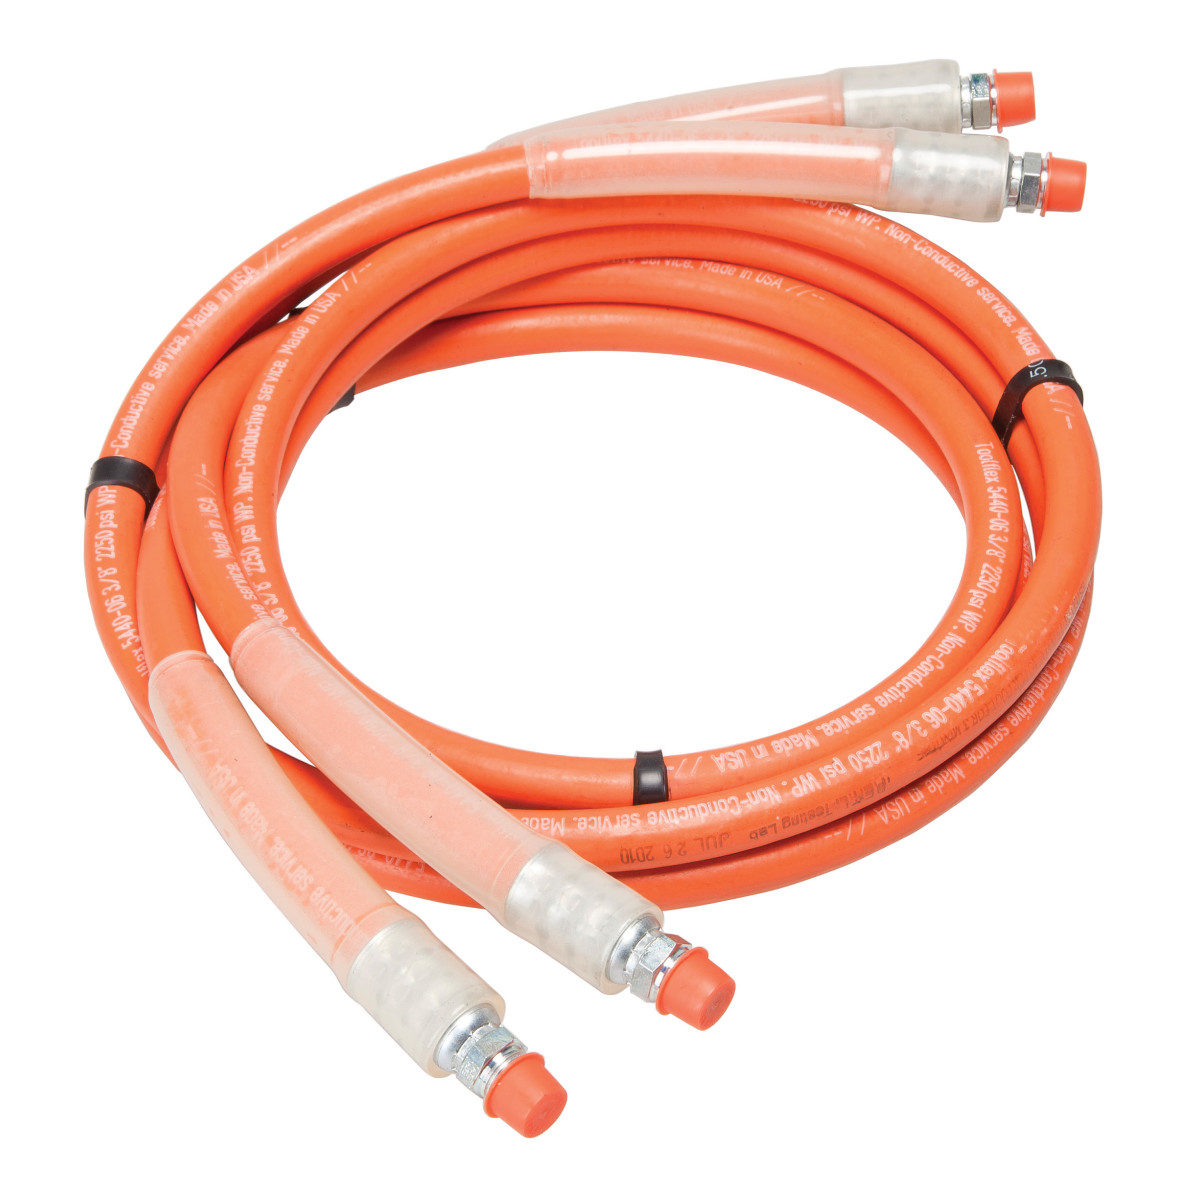 Two 3/8″ x 8” (10 mm x 2.4 m) I.D. Hoses with 3/8″ NPTF male fittings